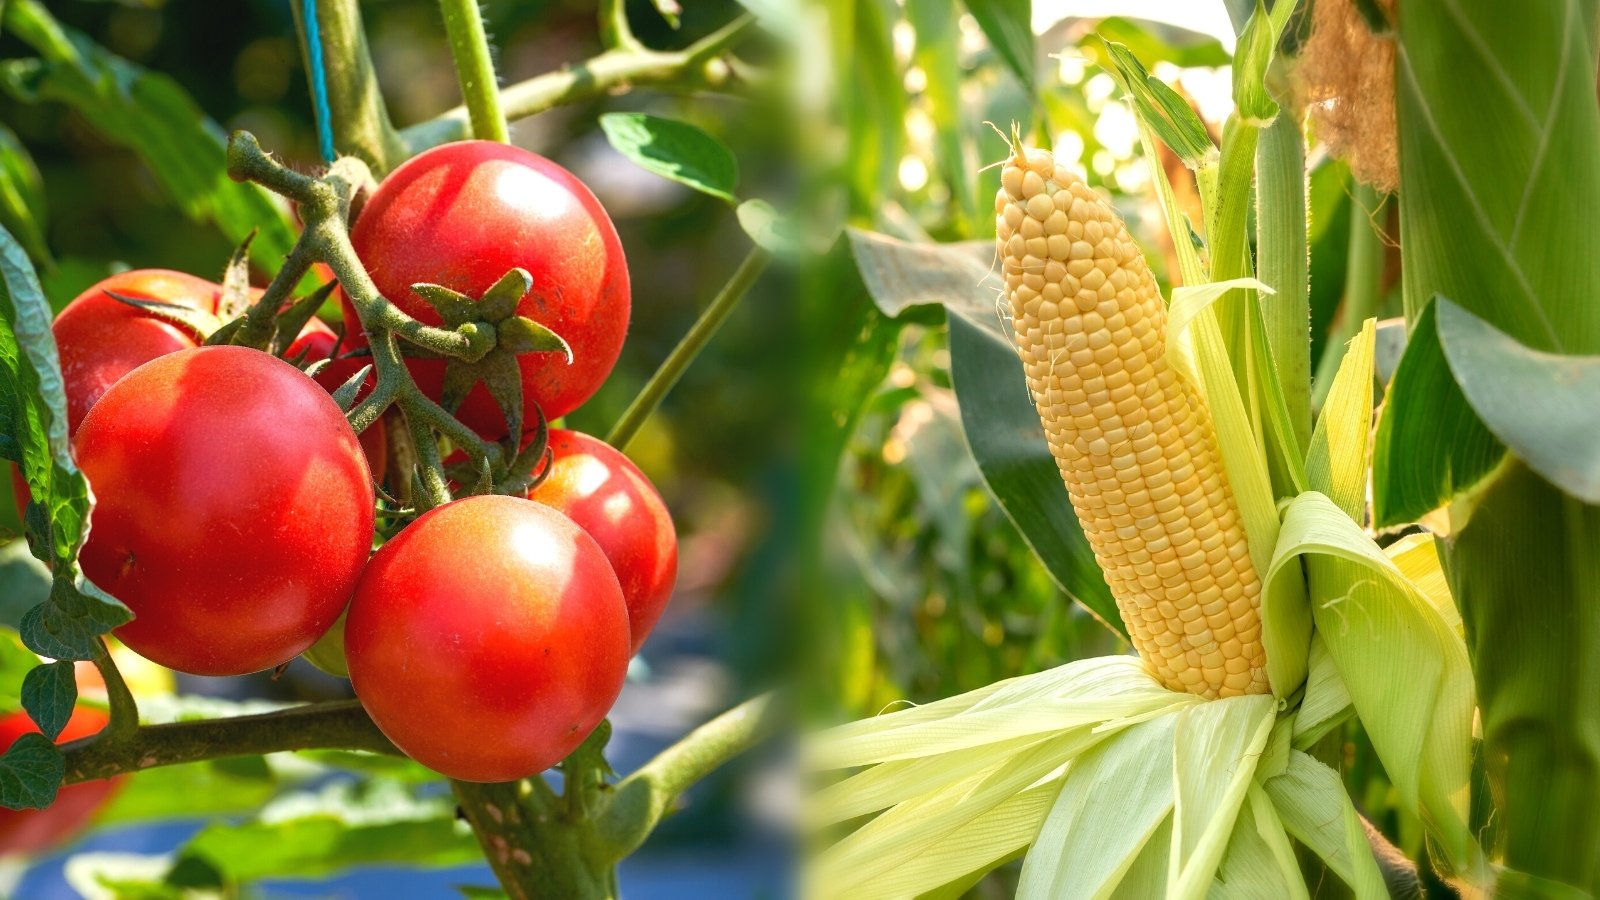 Can You Grow Tomatoes With Corn?